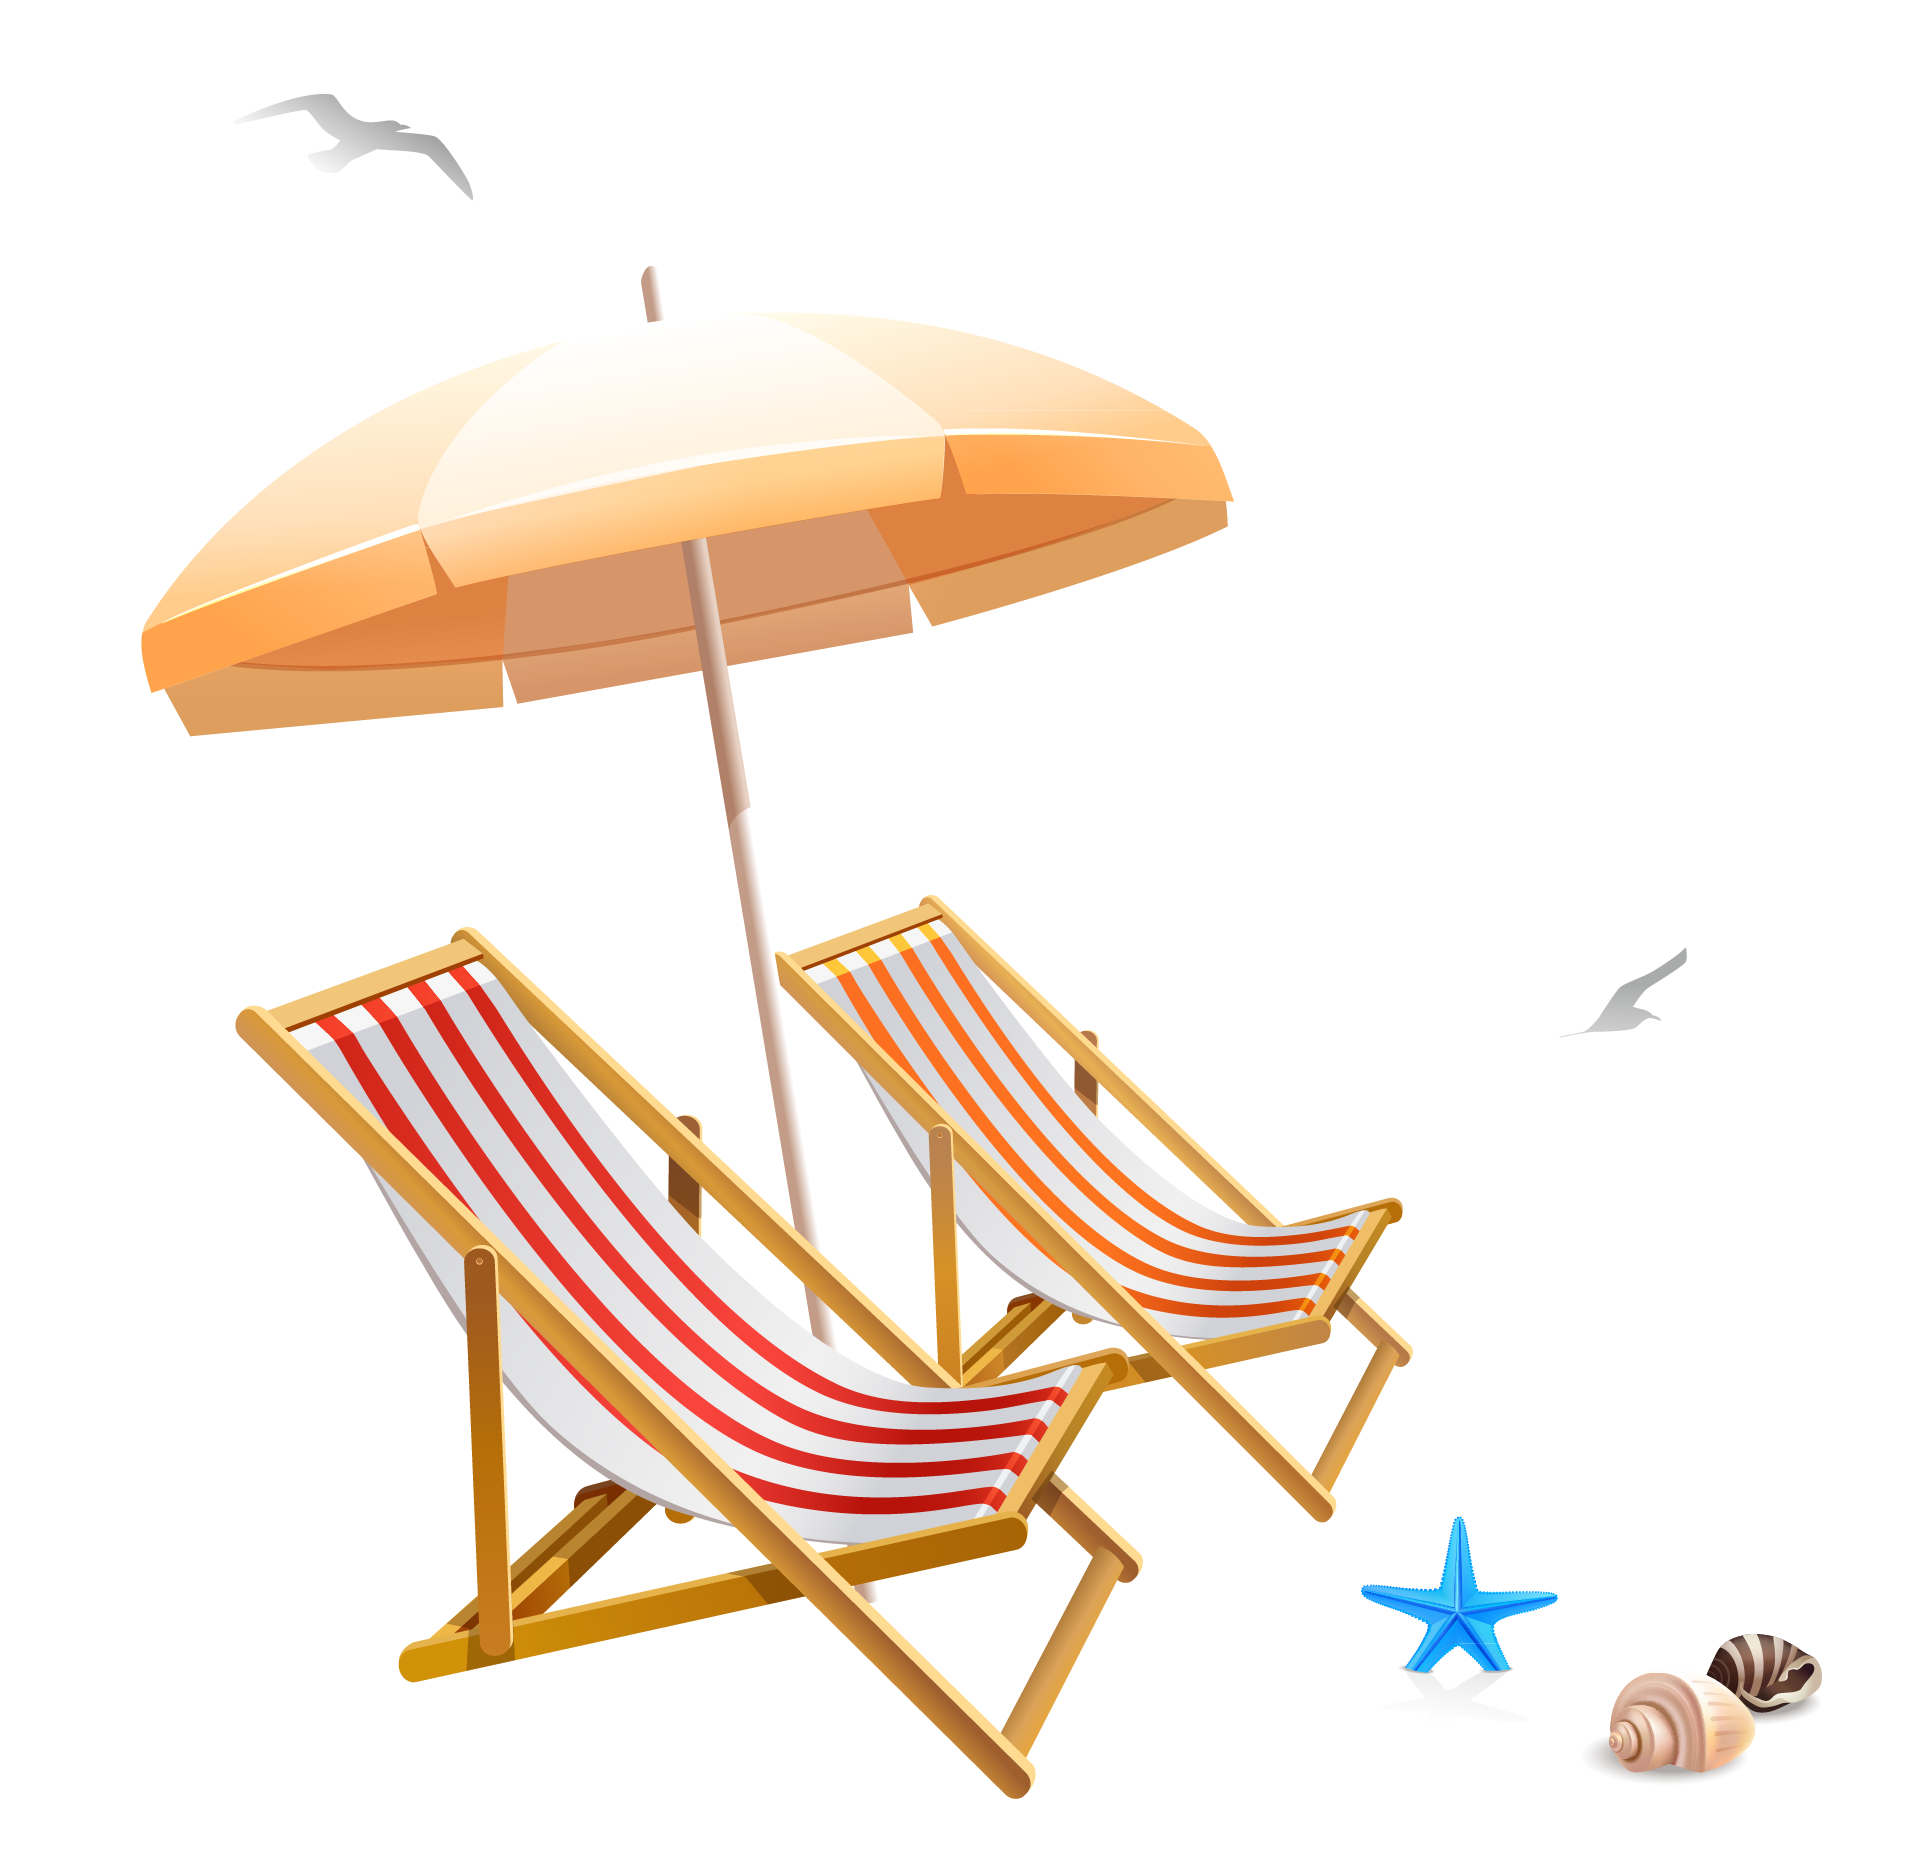 Chairs Umbrella Chair Beach And PNG Image High Quality Clipart